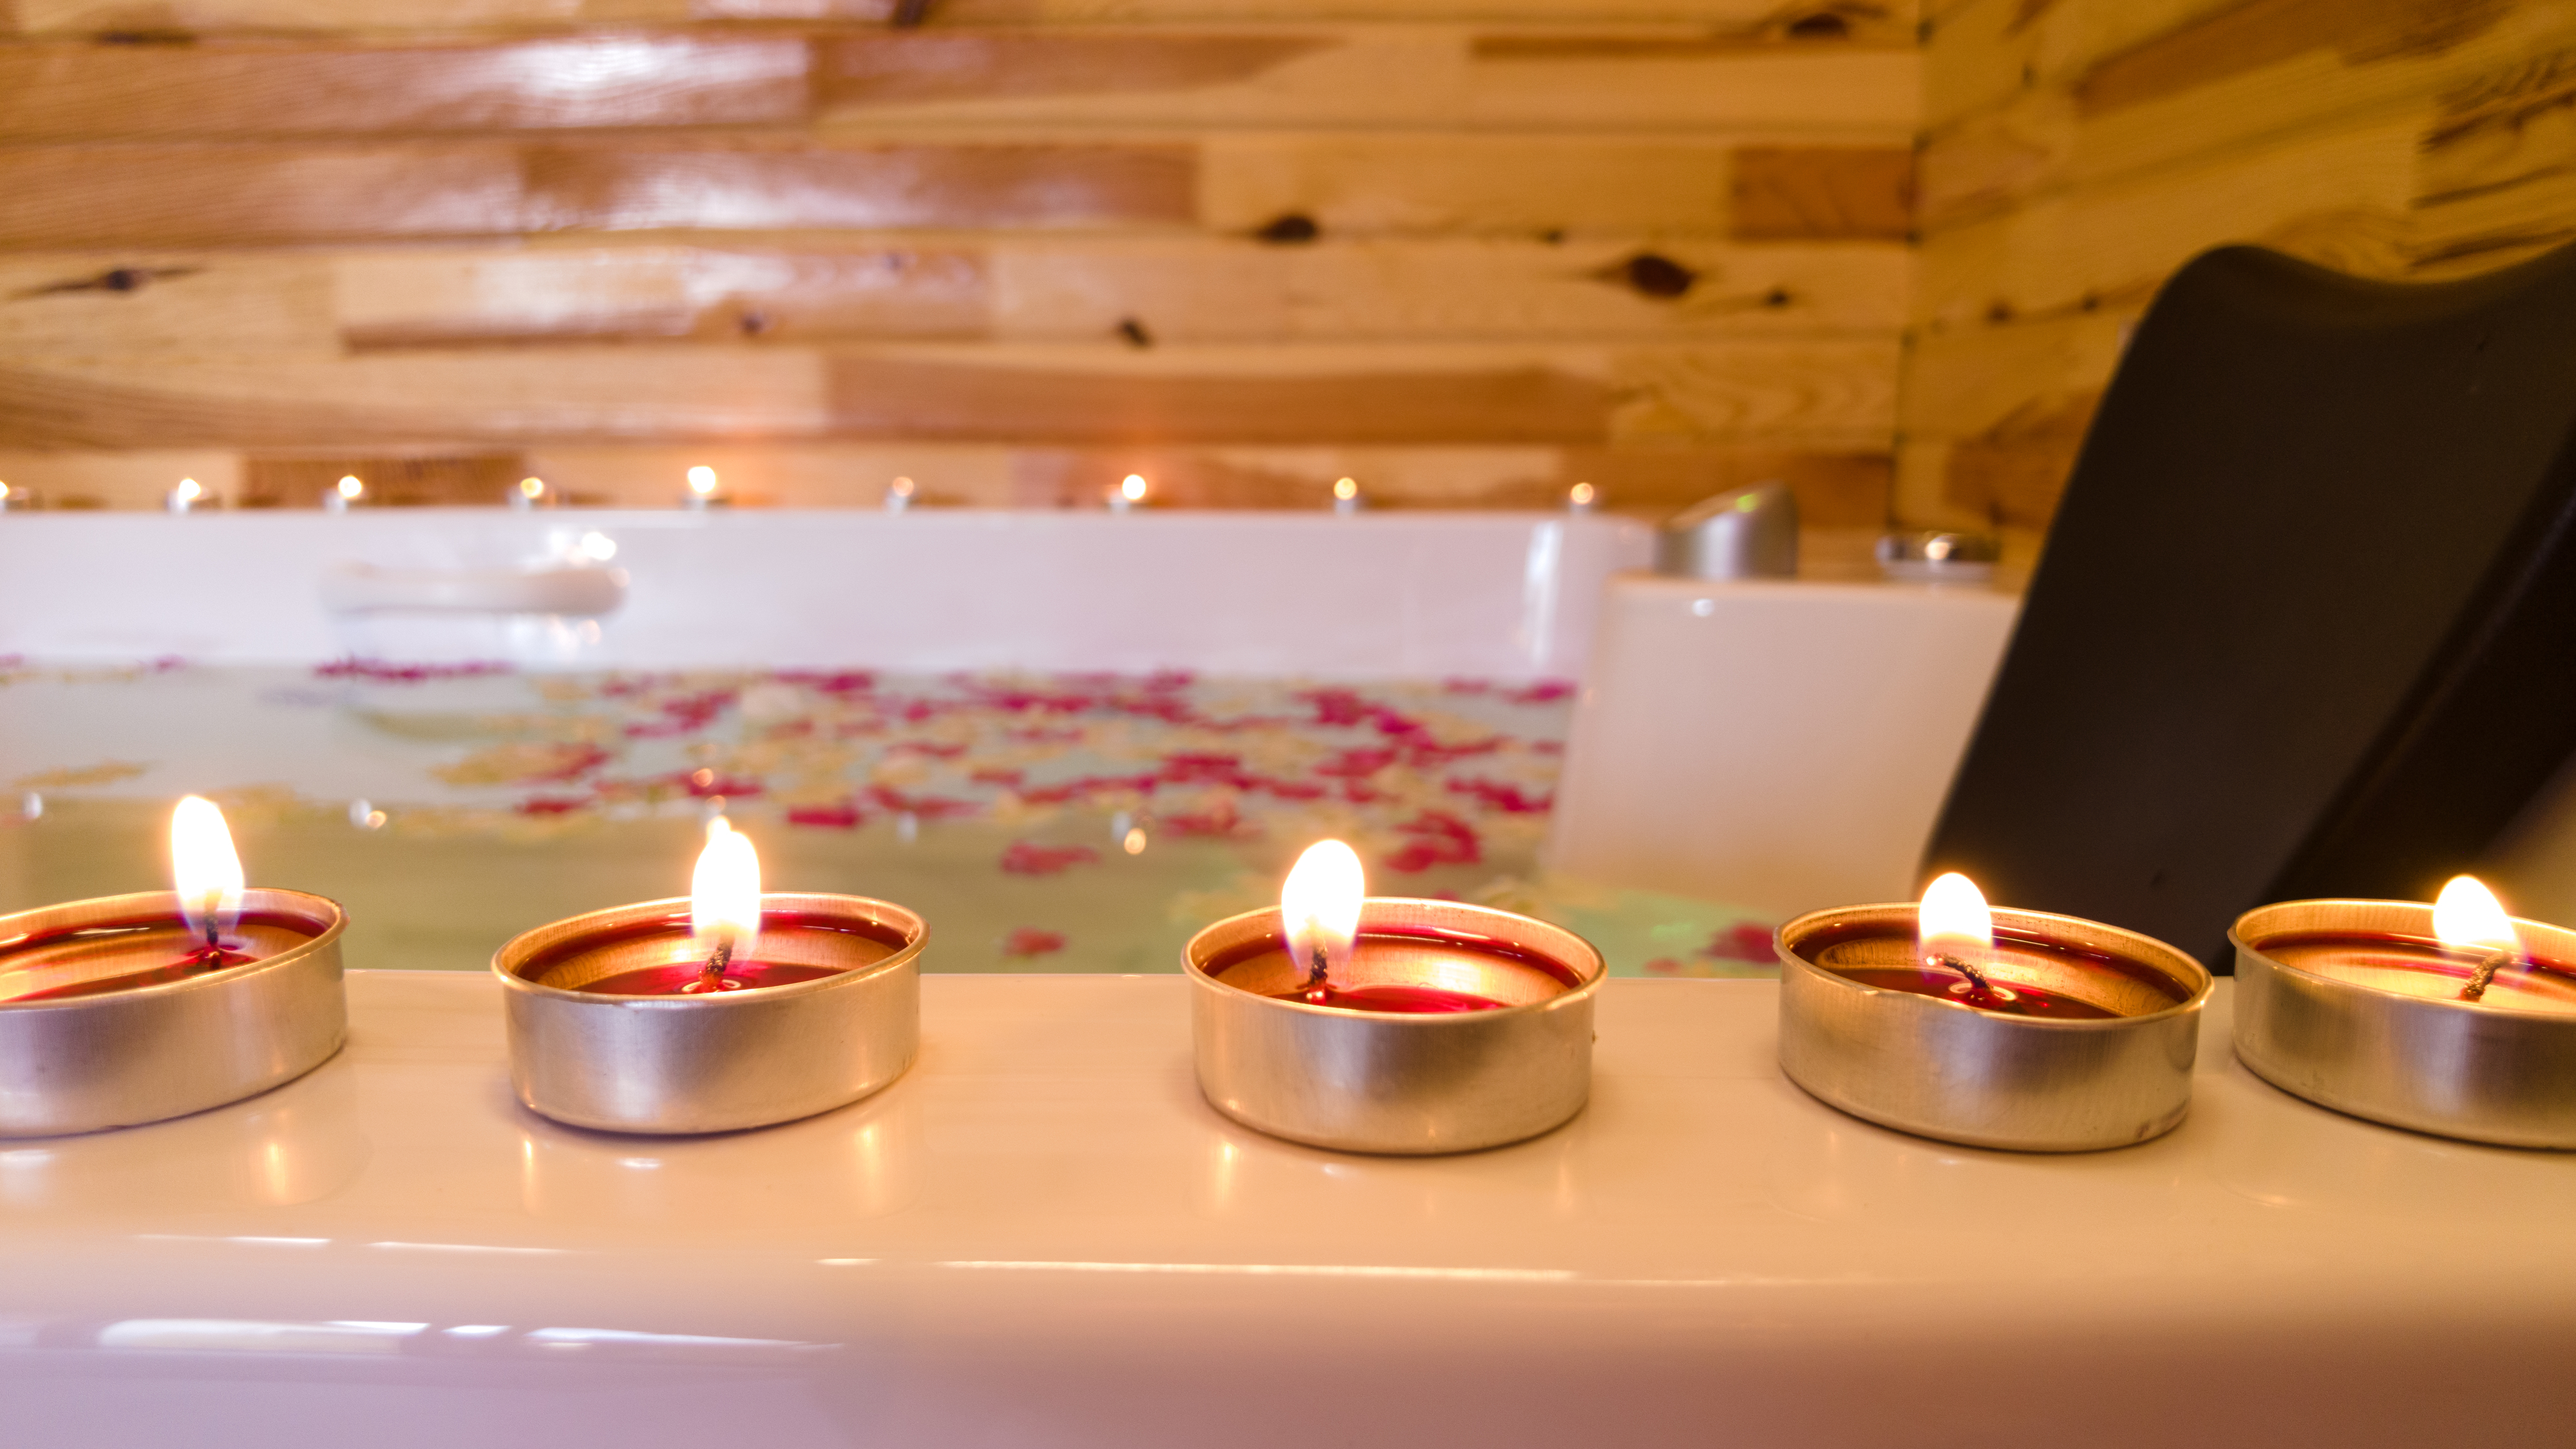 Scented candles on a bathtub edge, creating a relaxing atmosphere for a spa-like shopping article